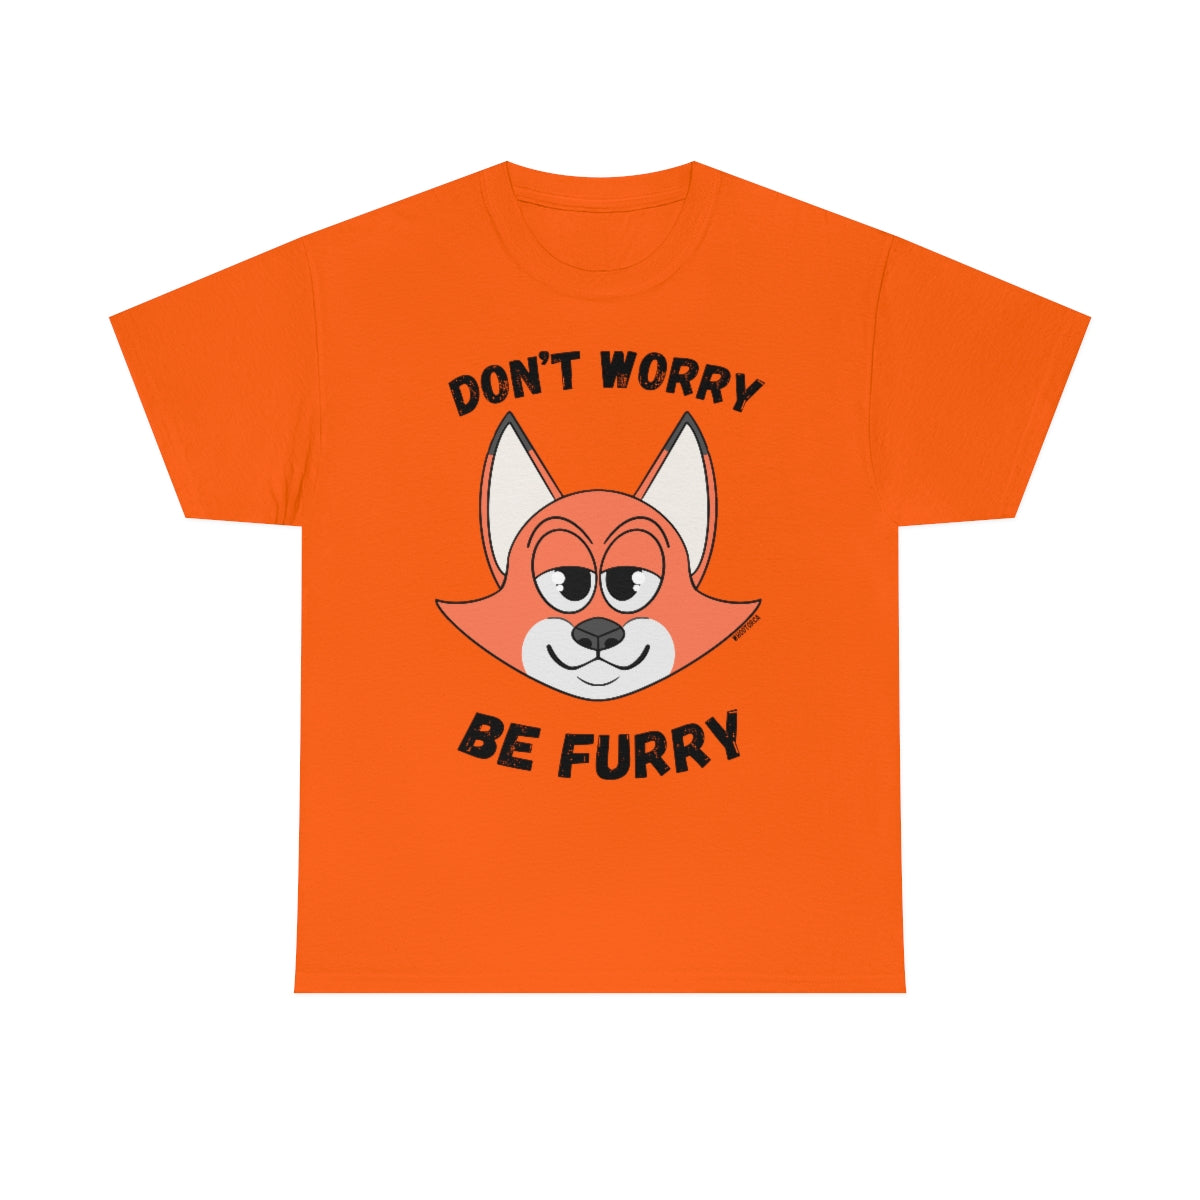 Don't Worry Be Furry! - T-Shirt T-Shirt AFLT-Whootorca Orange S 